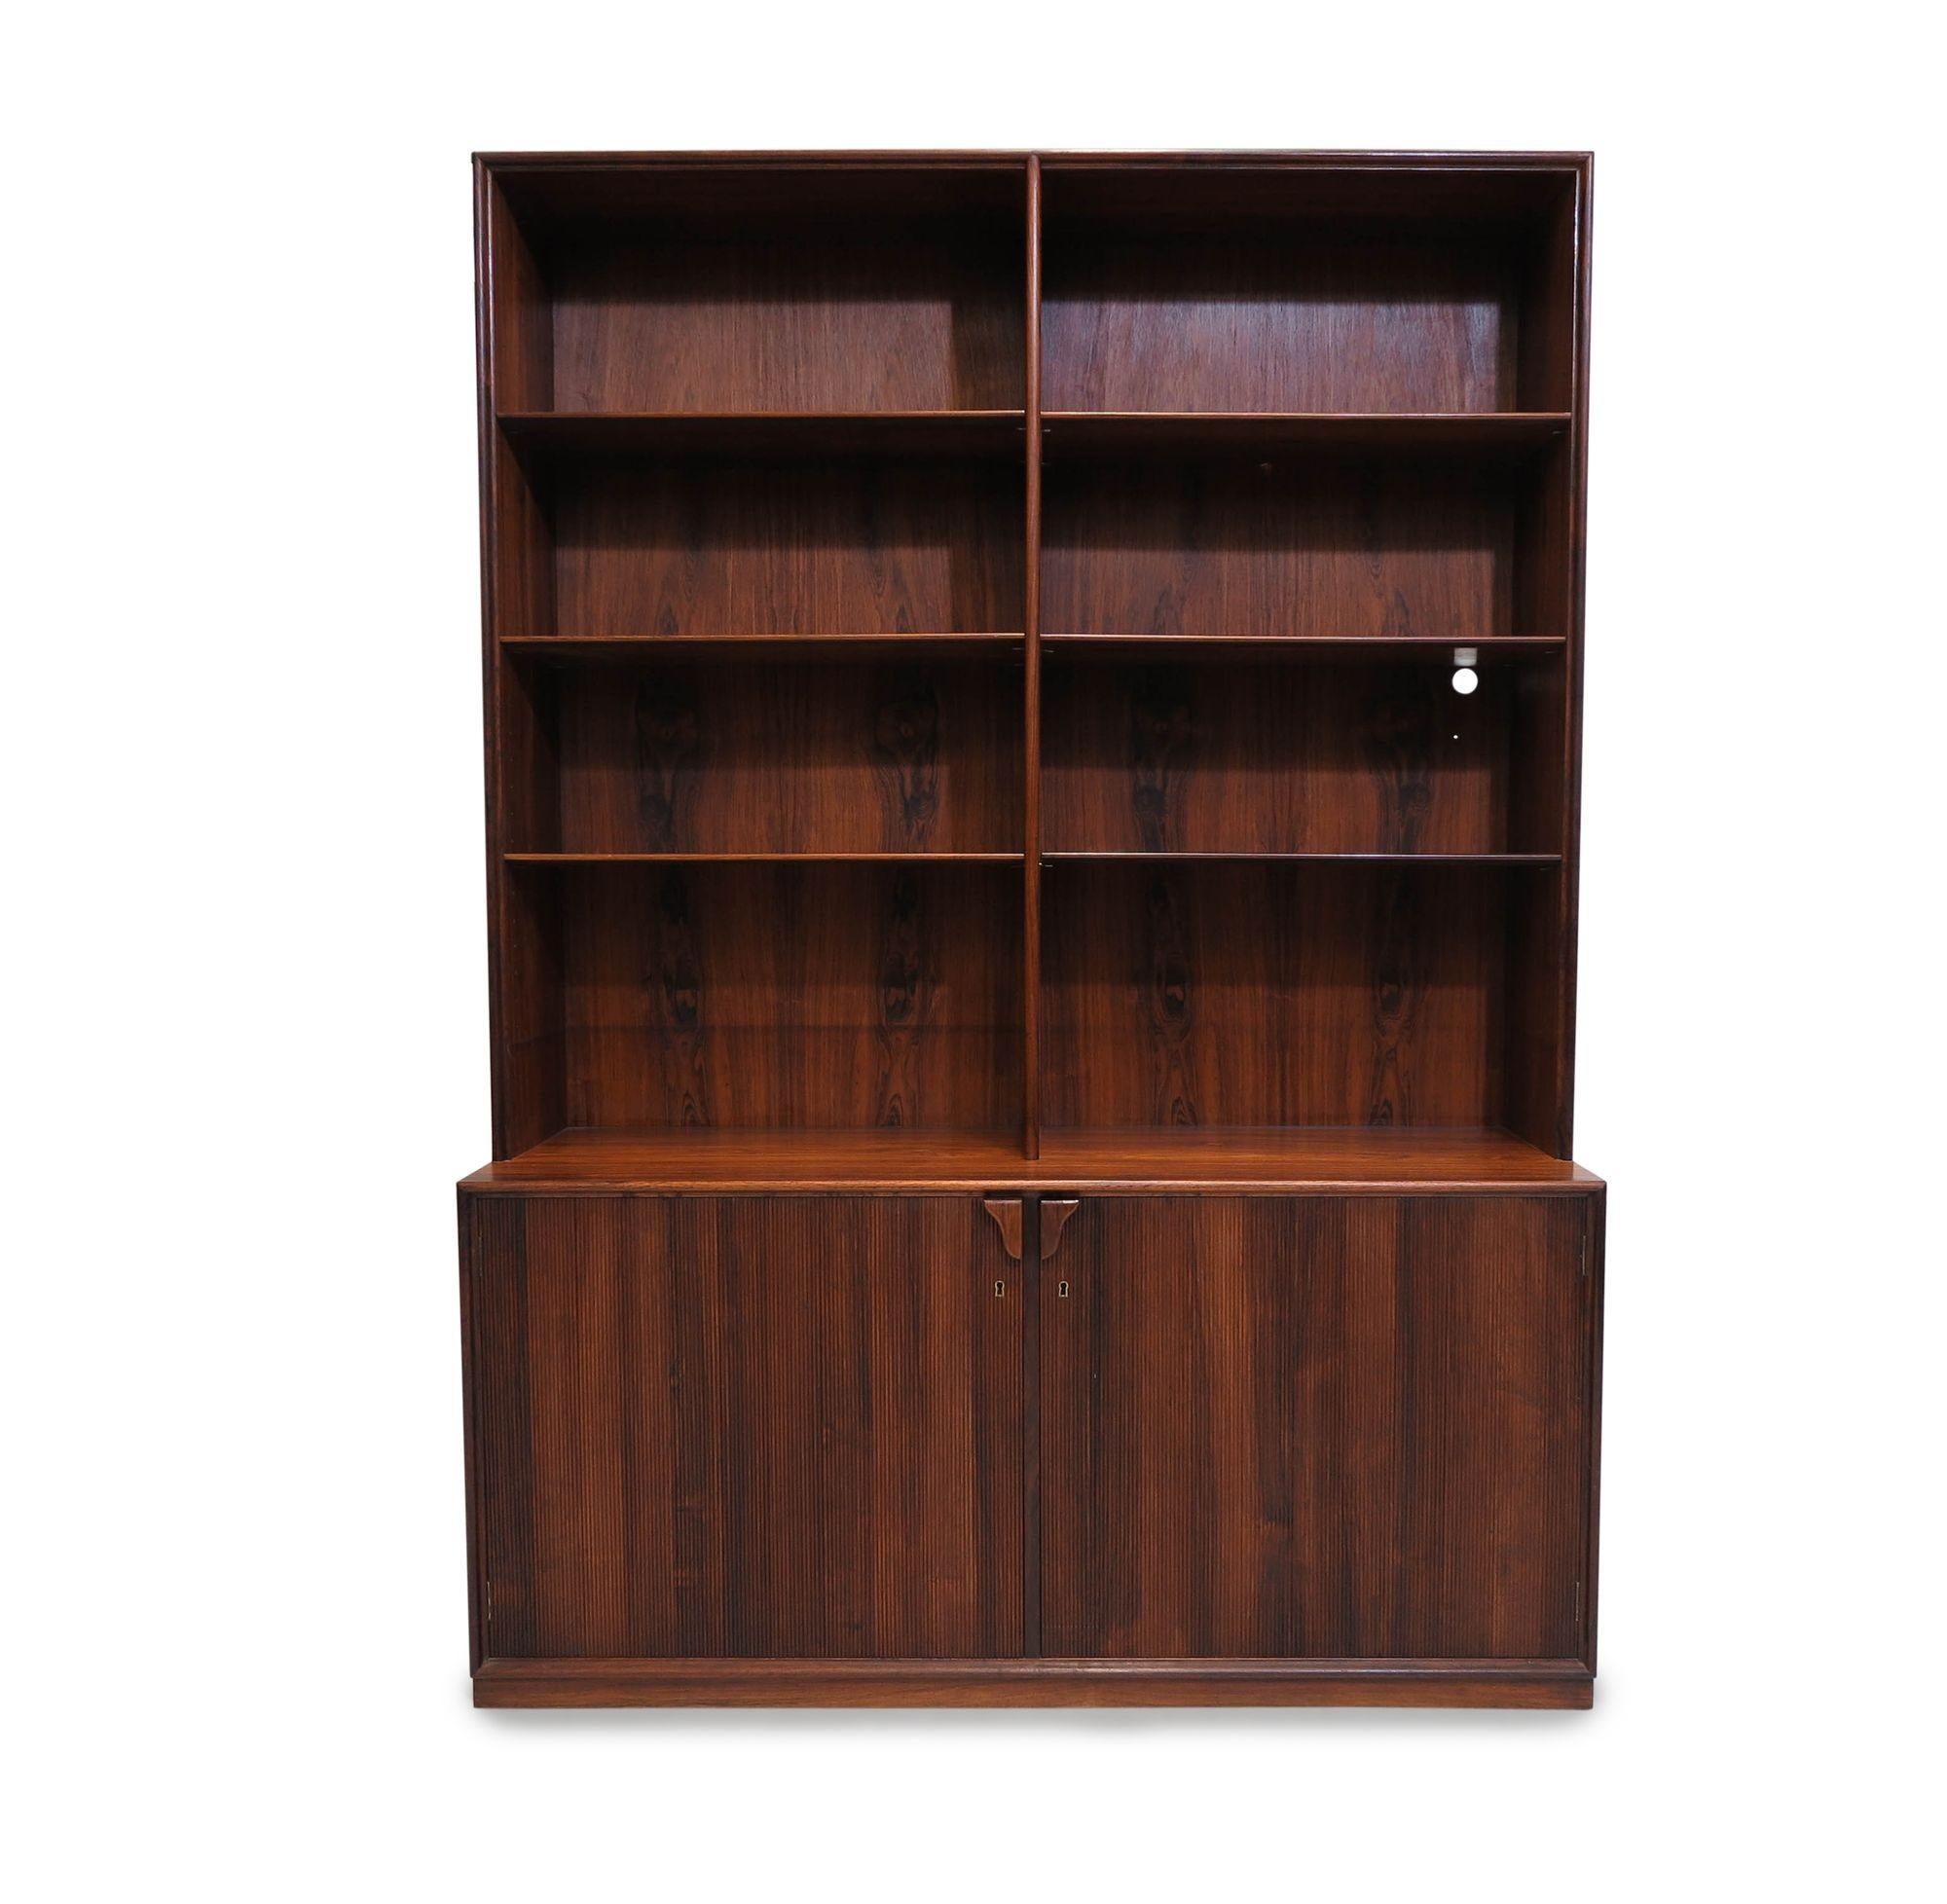 Frode Holm for Illums Bolighus Danish Rosewood Bookcase Cabinets In Excellent Condition For Sale In Oakland, CA